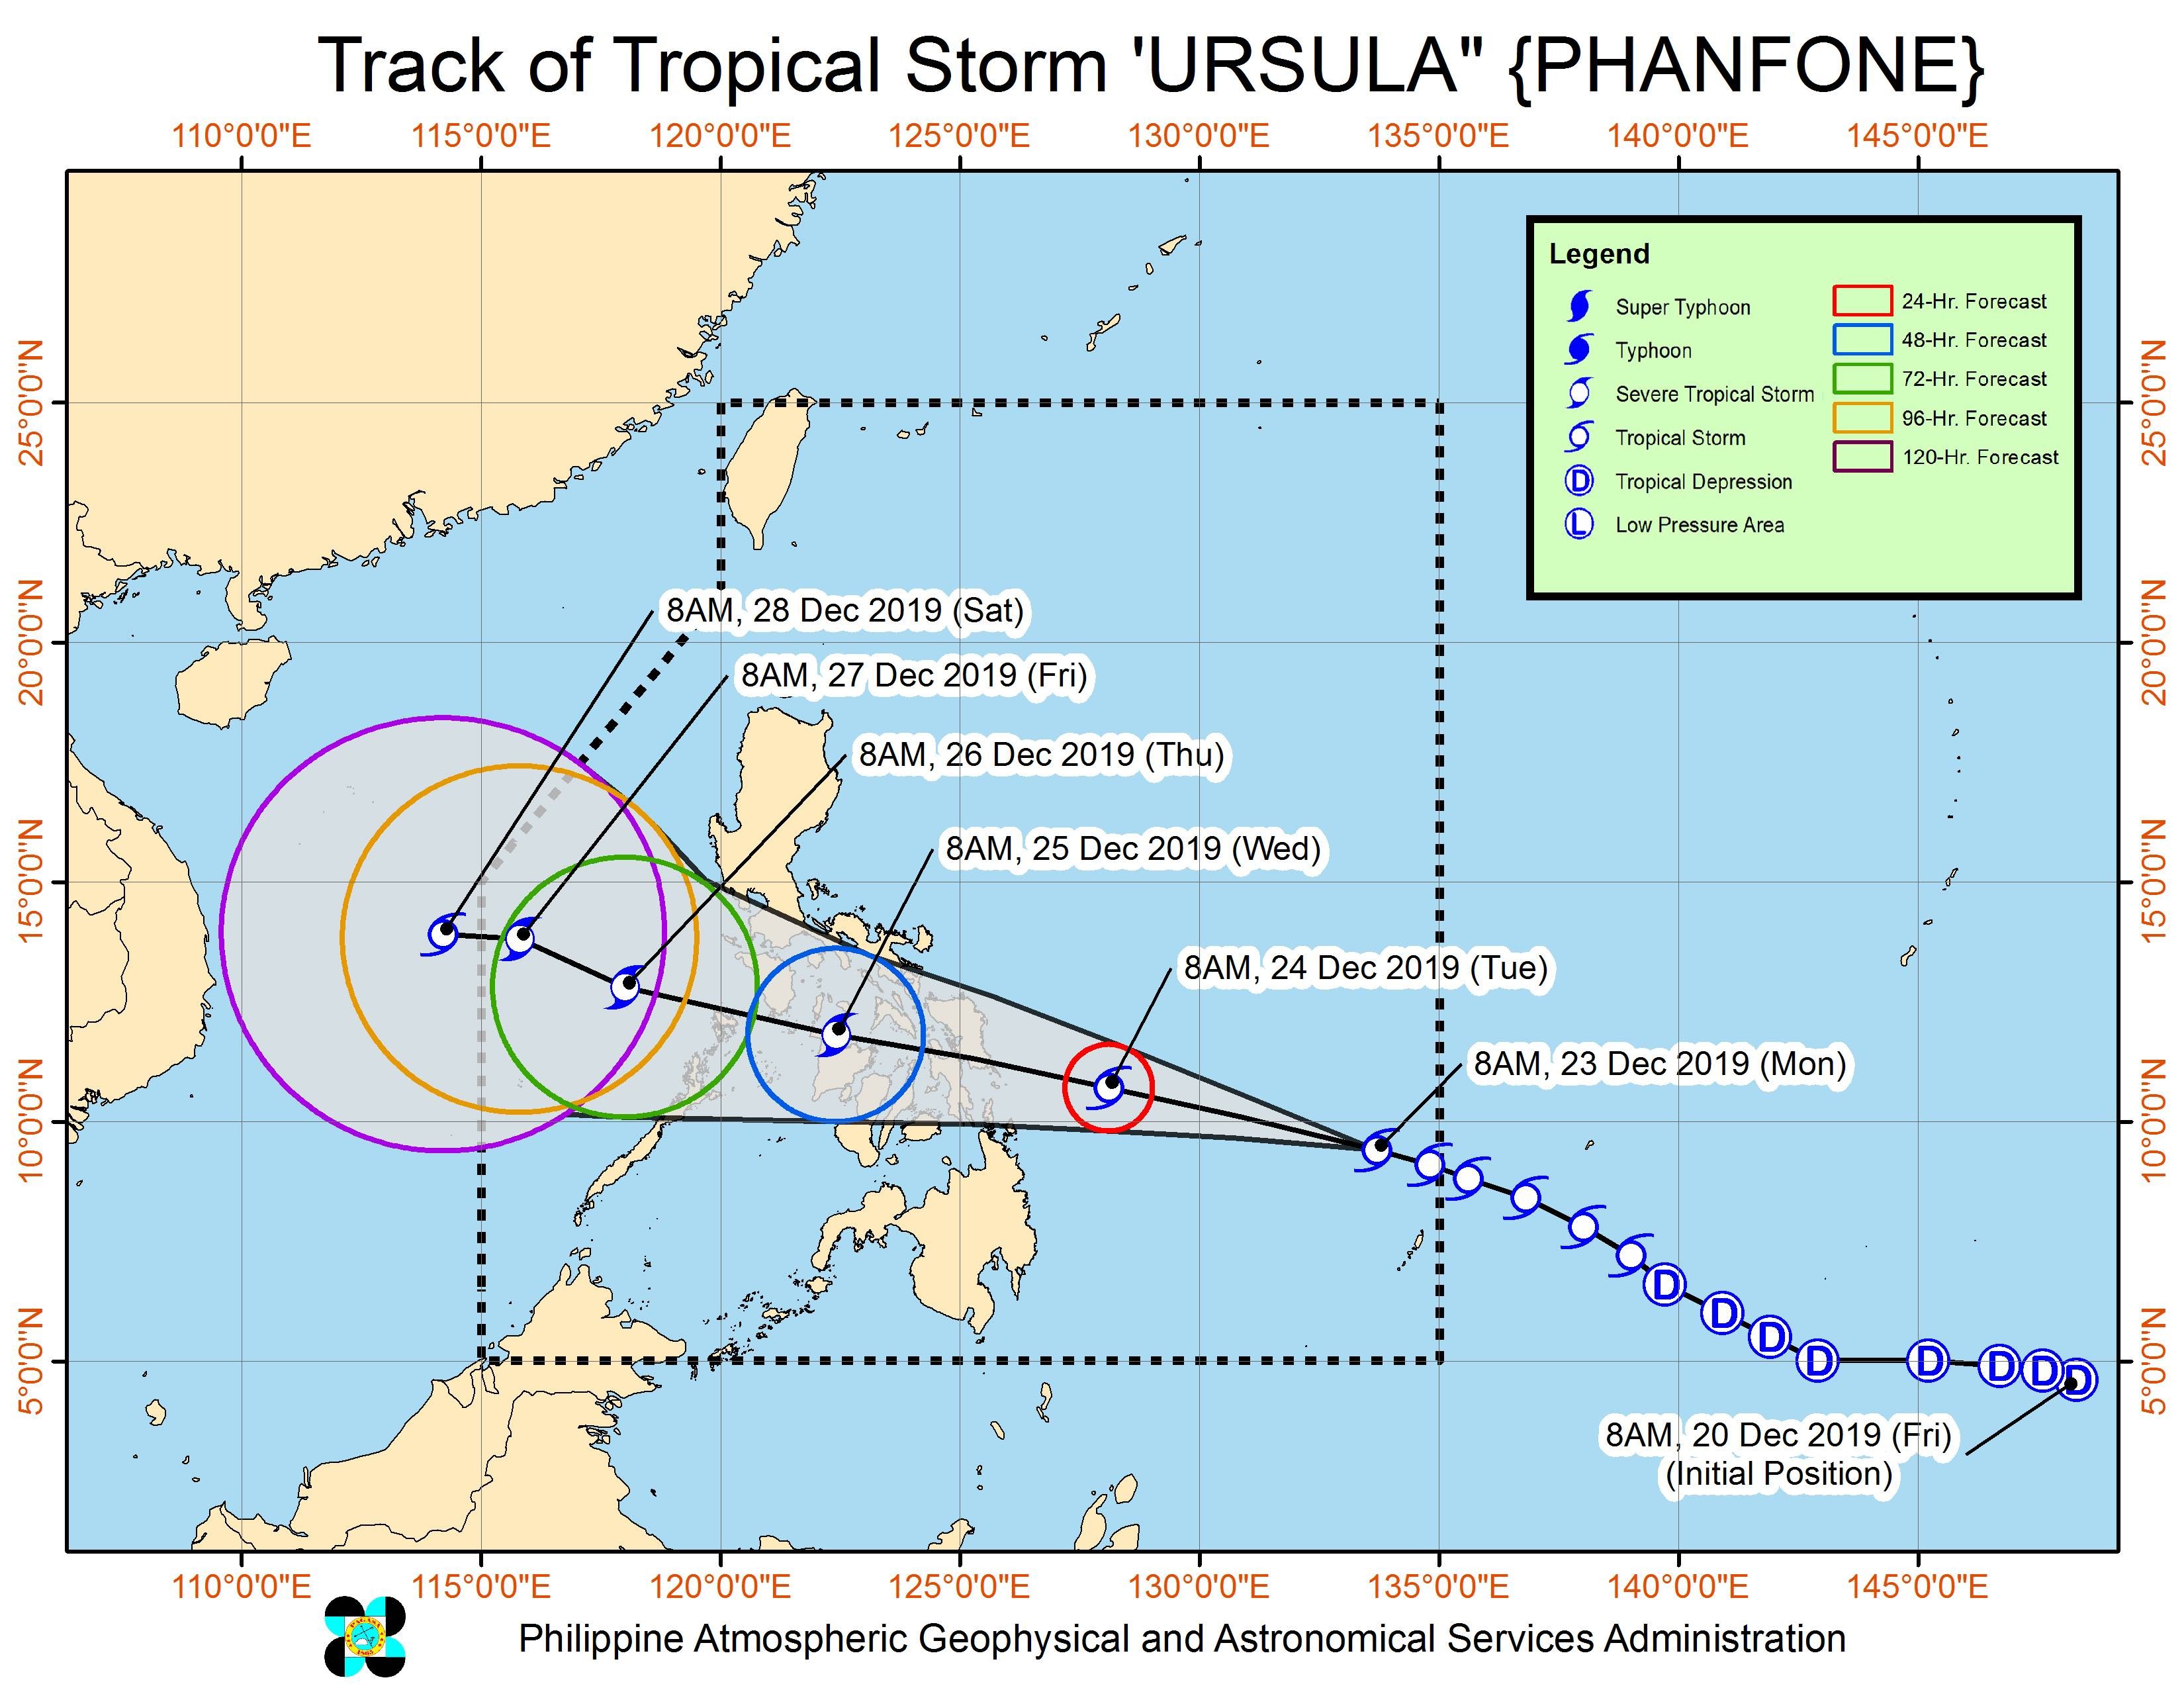 Forecast track of Tropical Storm Ursula (Phanfone) as of December 23, 2019, 11 am. Image from PAGASA 